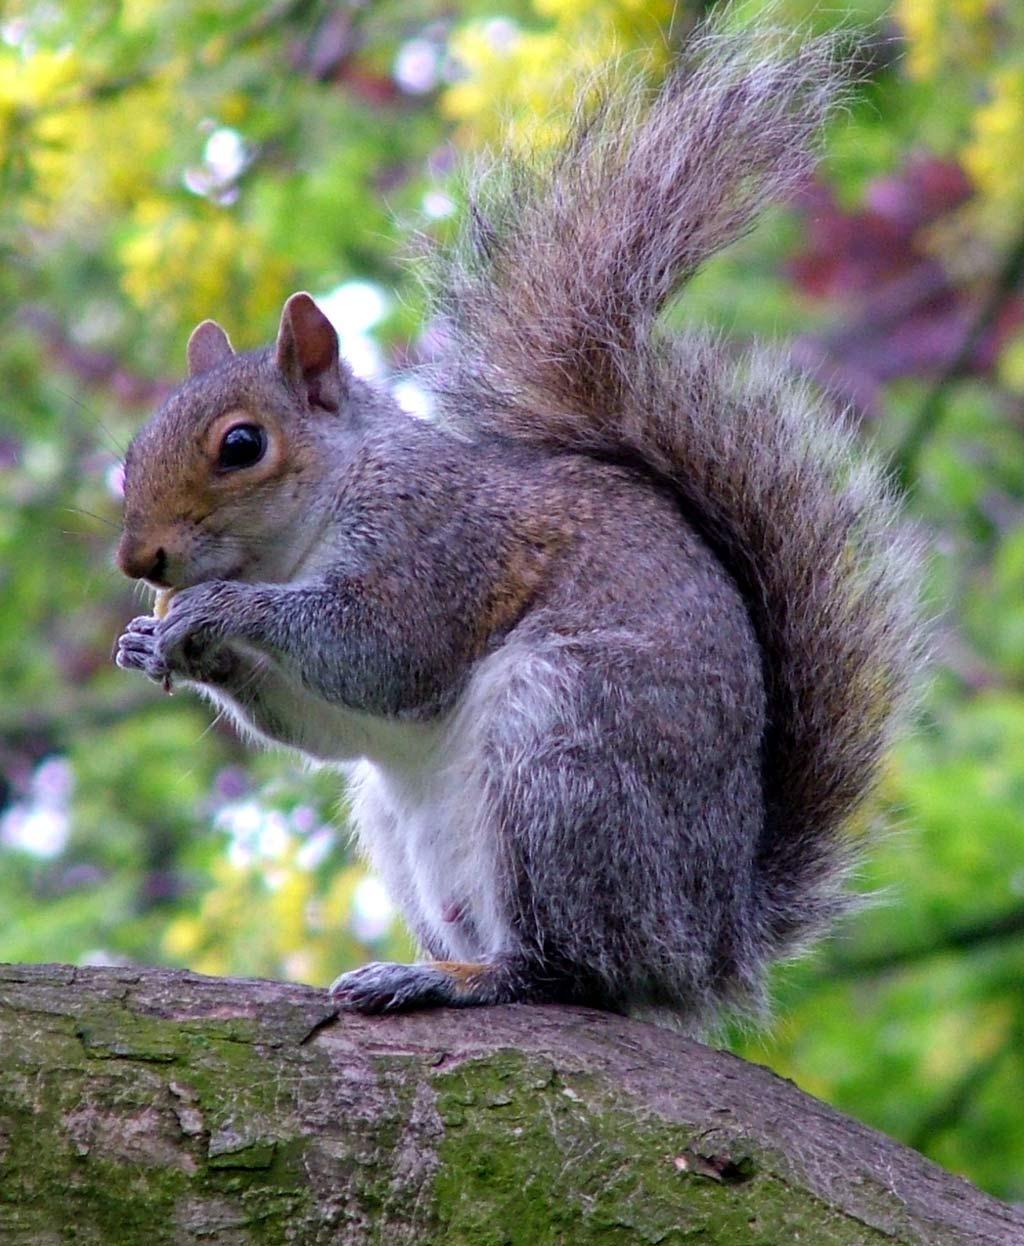 Squirrels are omnivores (they eat plants and meat).